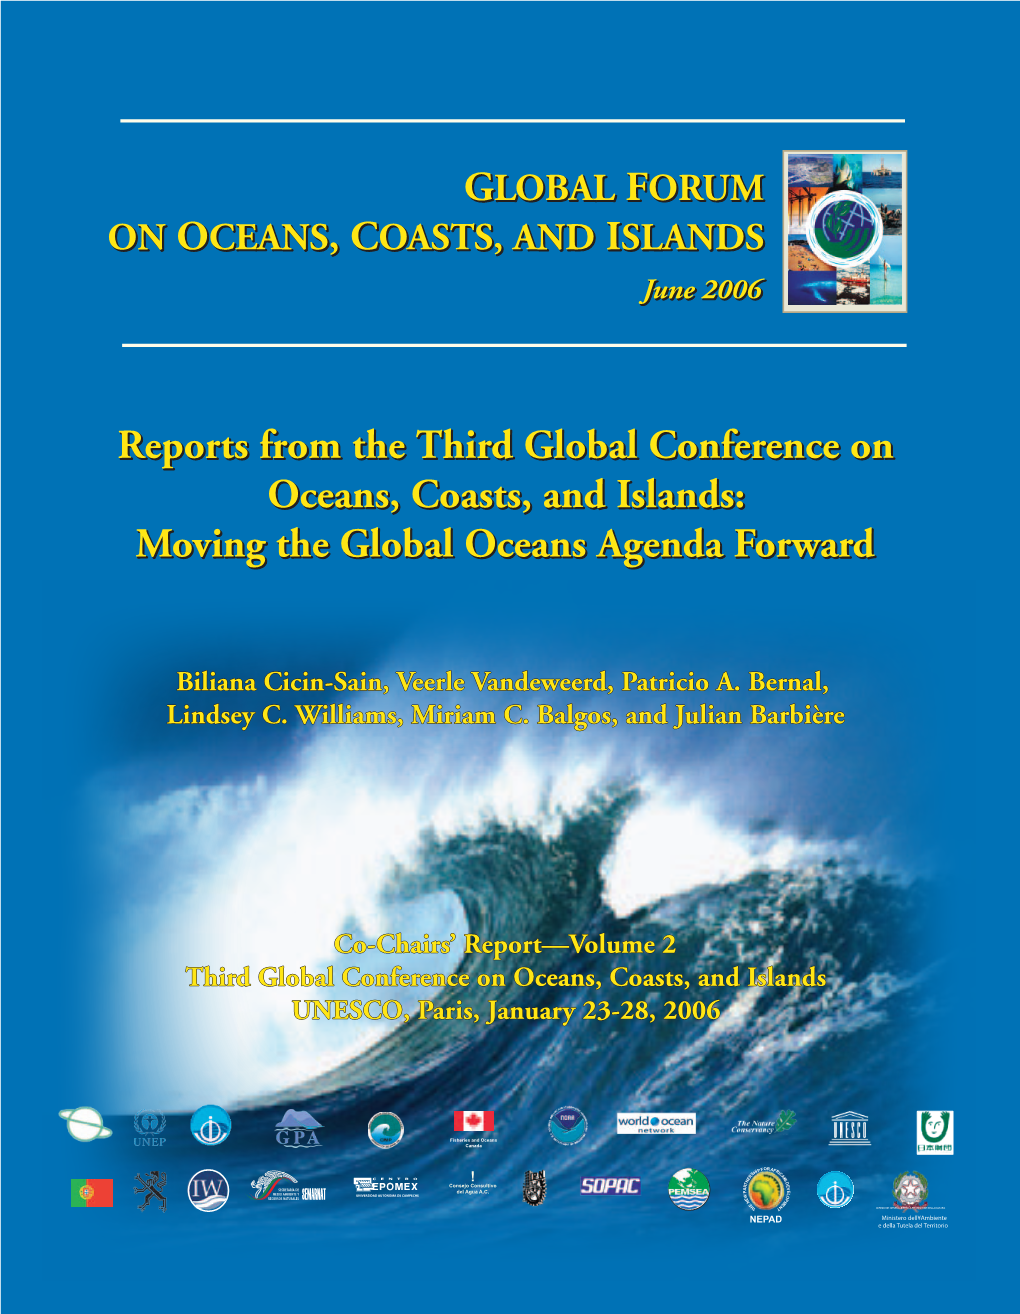 Reports from the Third Global Conference on Oceans, Coasts, and Islands: Moving the Global Oceans Agenda Forward